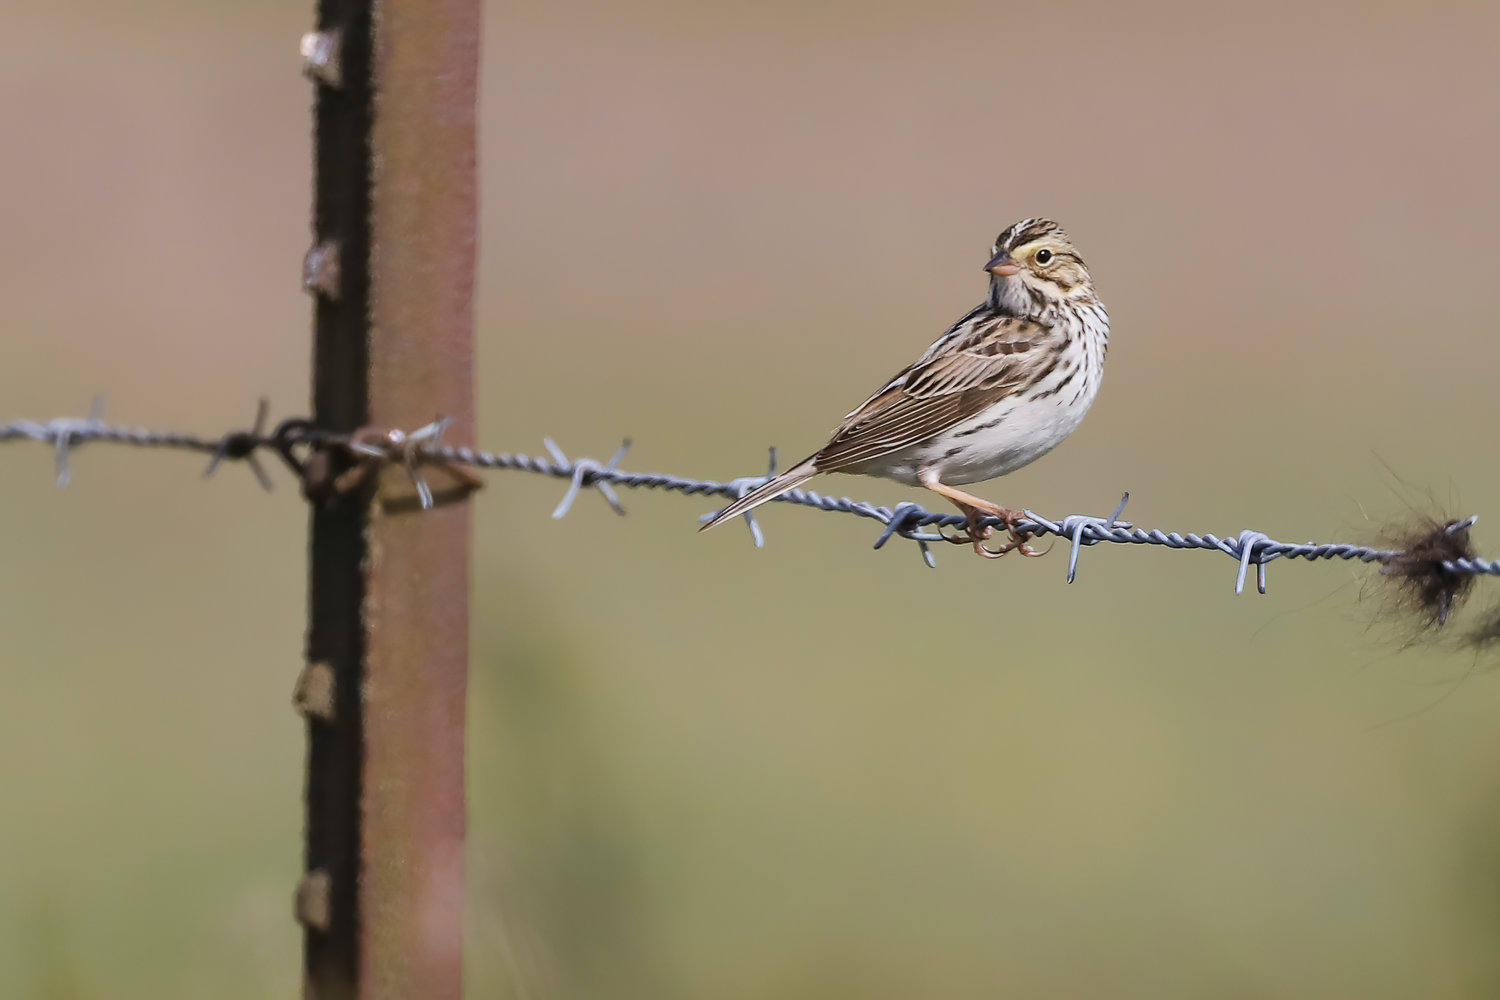 The Savannah Sparrow builds its nest on the grounds of grassland prairies.